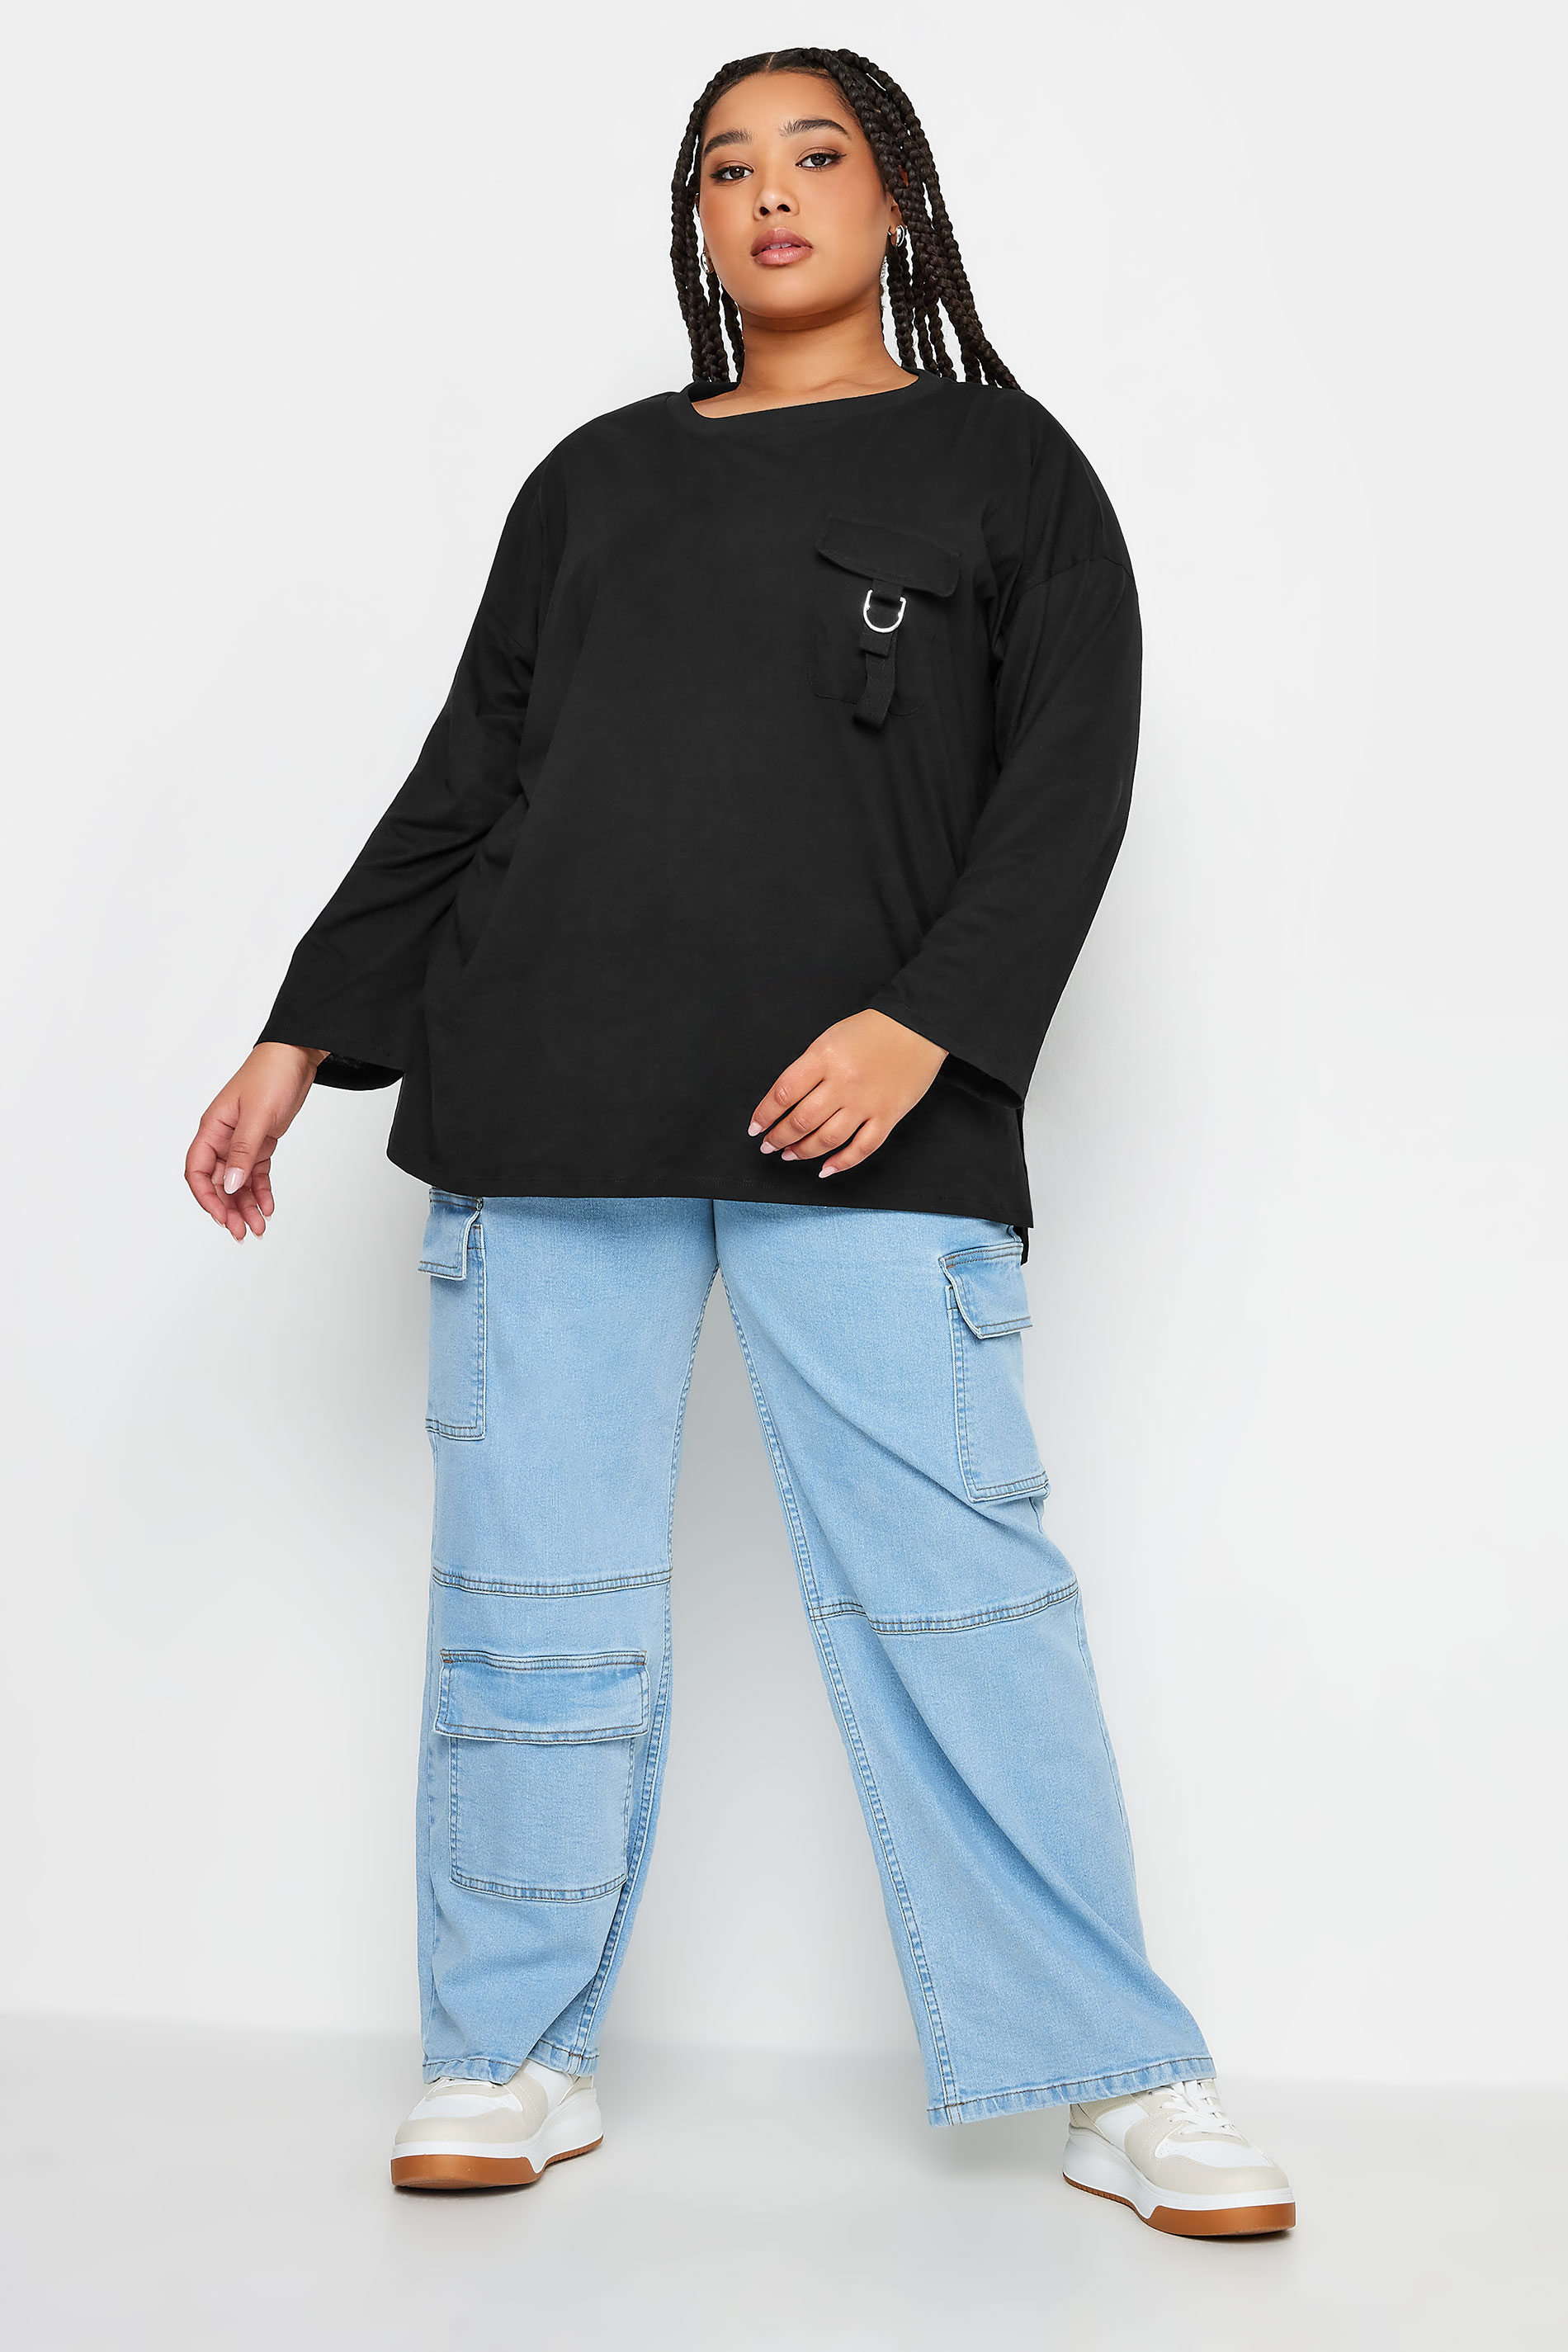 LIMITED COLLECTION Plus Size Black Utility Pocket Long Sleeve T-Shirt | Yours Clothing 2